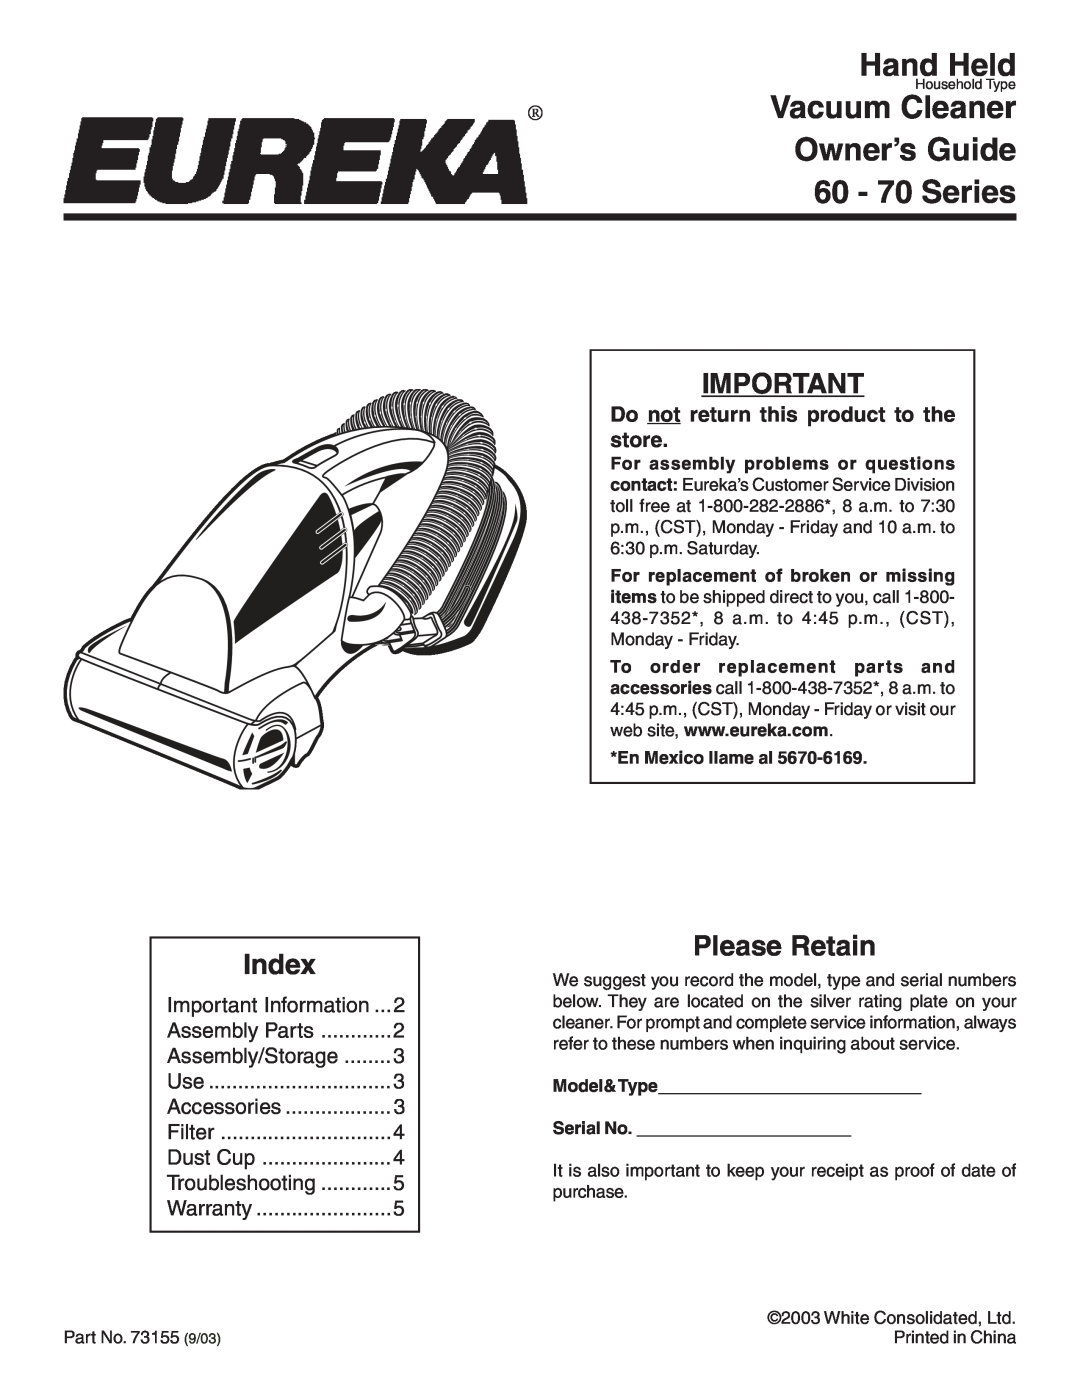 Eureka warranty Do not return this product to the store, Hand Held, Vacuum Cleaner, Owner’s Guide, 60 - 70 Series 